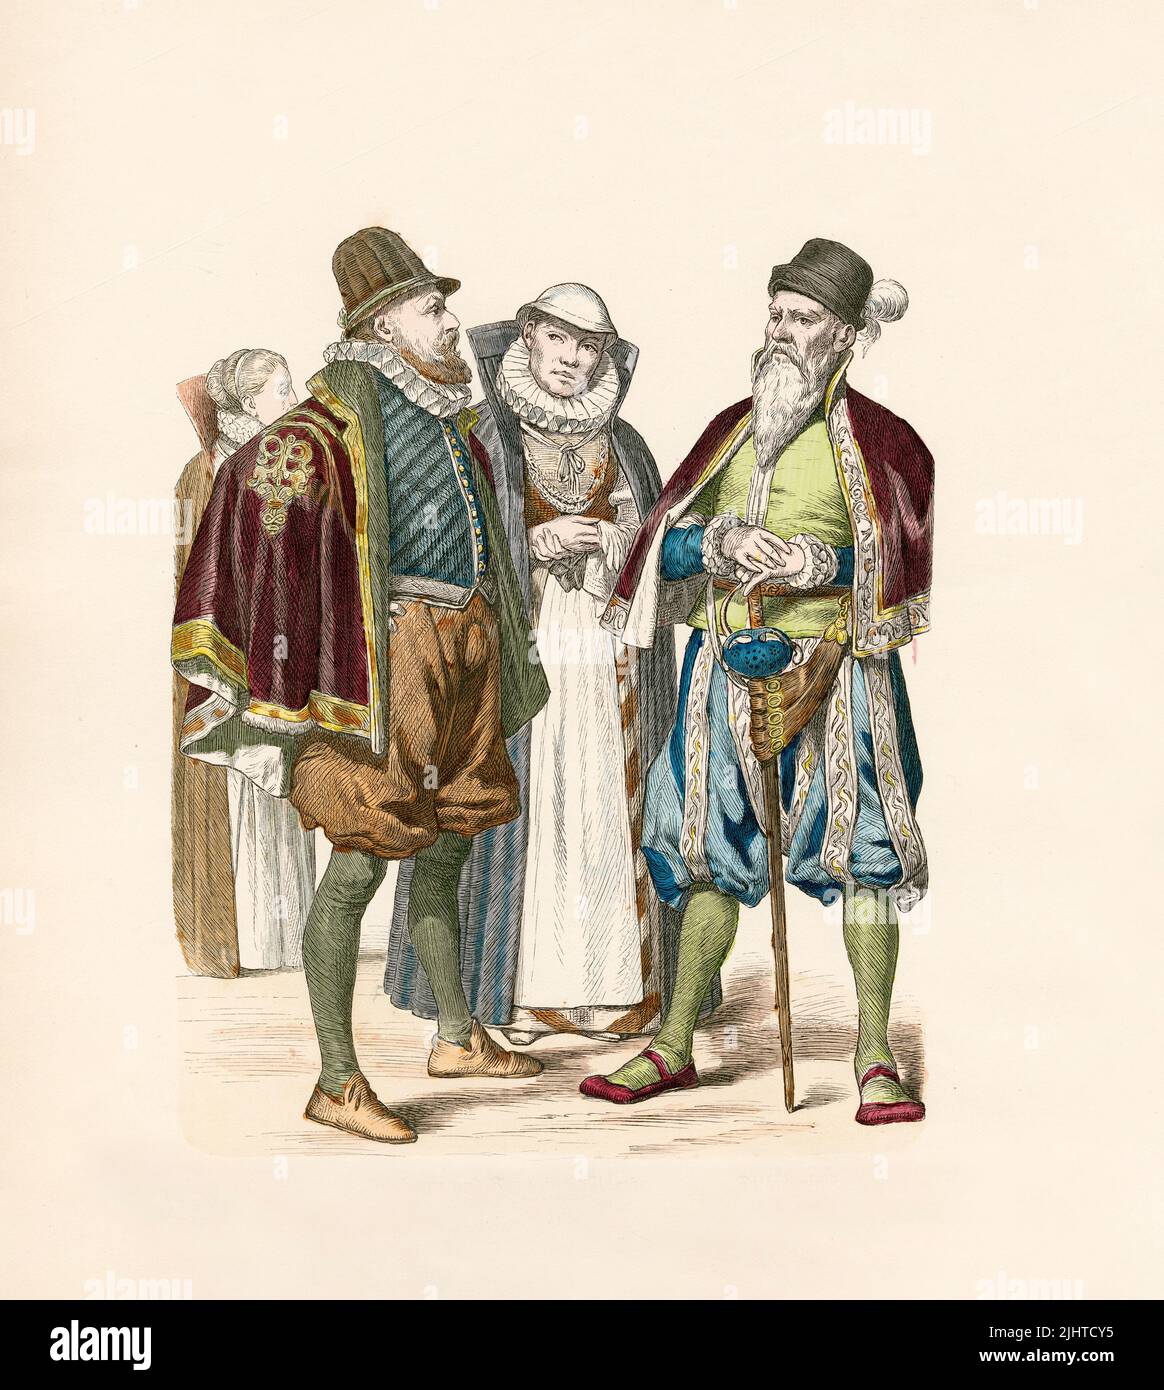 Woman from Rostock, Councilman and Lady from Wismar, Man from Dithmarschen, Germany, 1590, Illustration, The History of Costume, Braun & Schneider, Munich, Germany, 1861-1880 Stock Photo